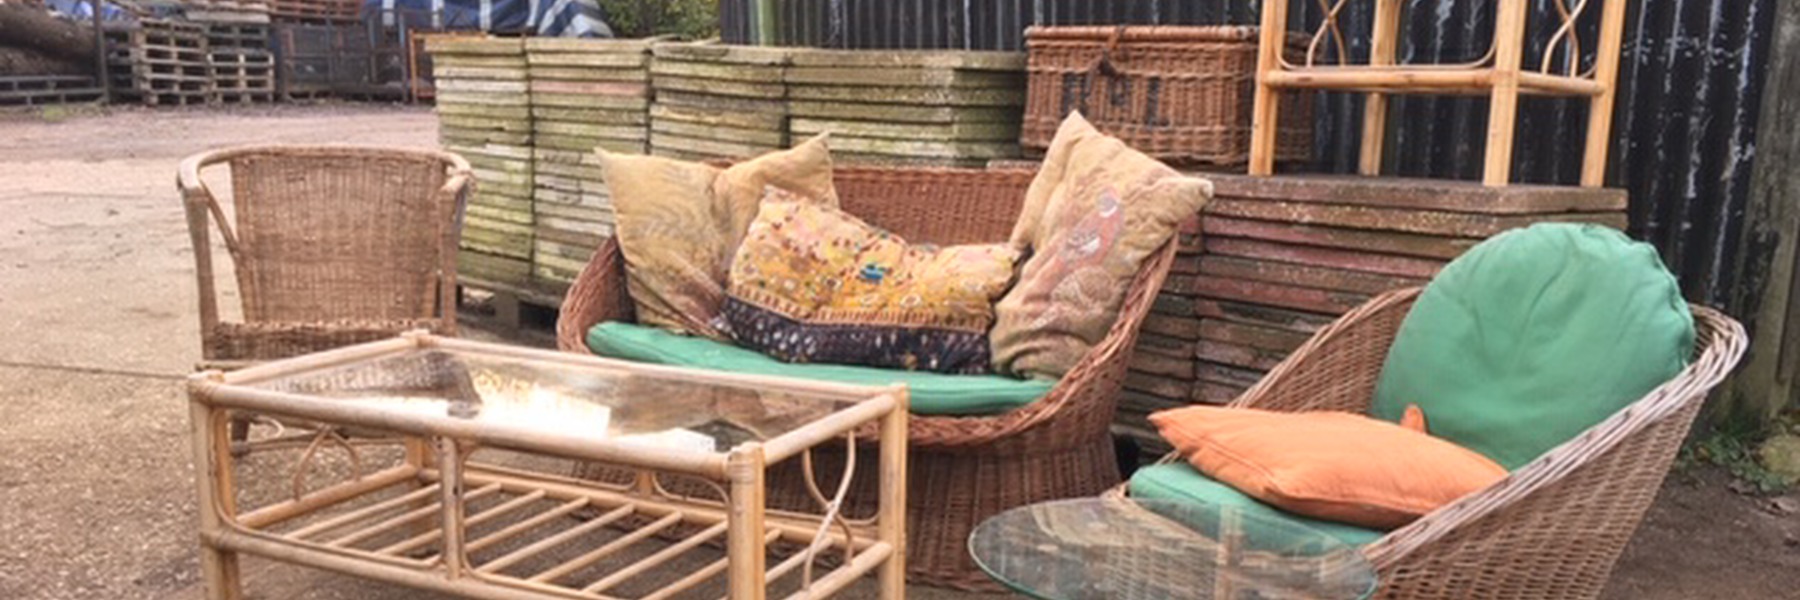 treesave reclamation yard with antiques and interiors suffolk essex